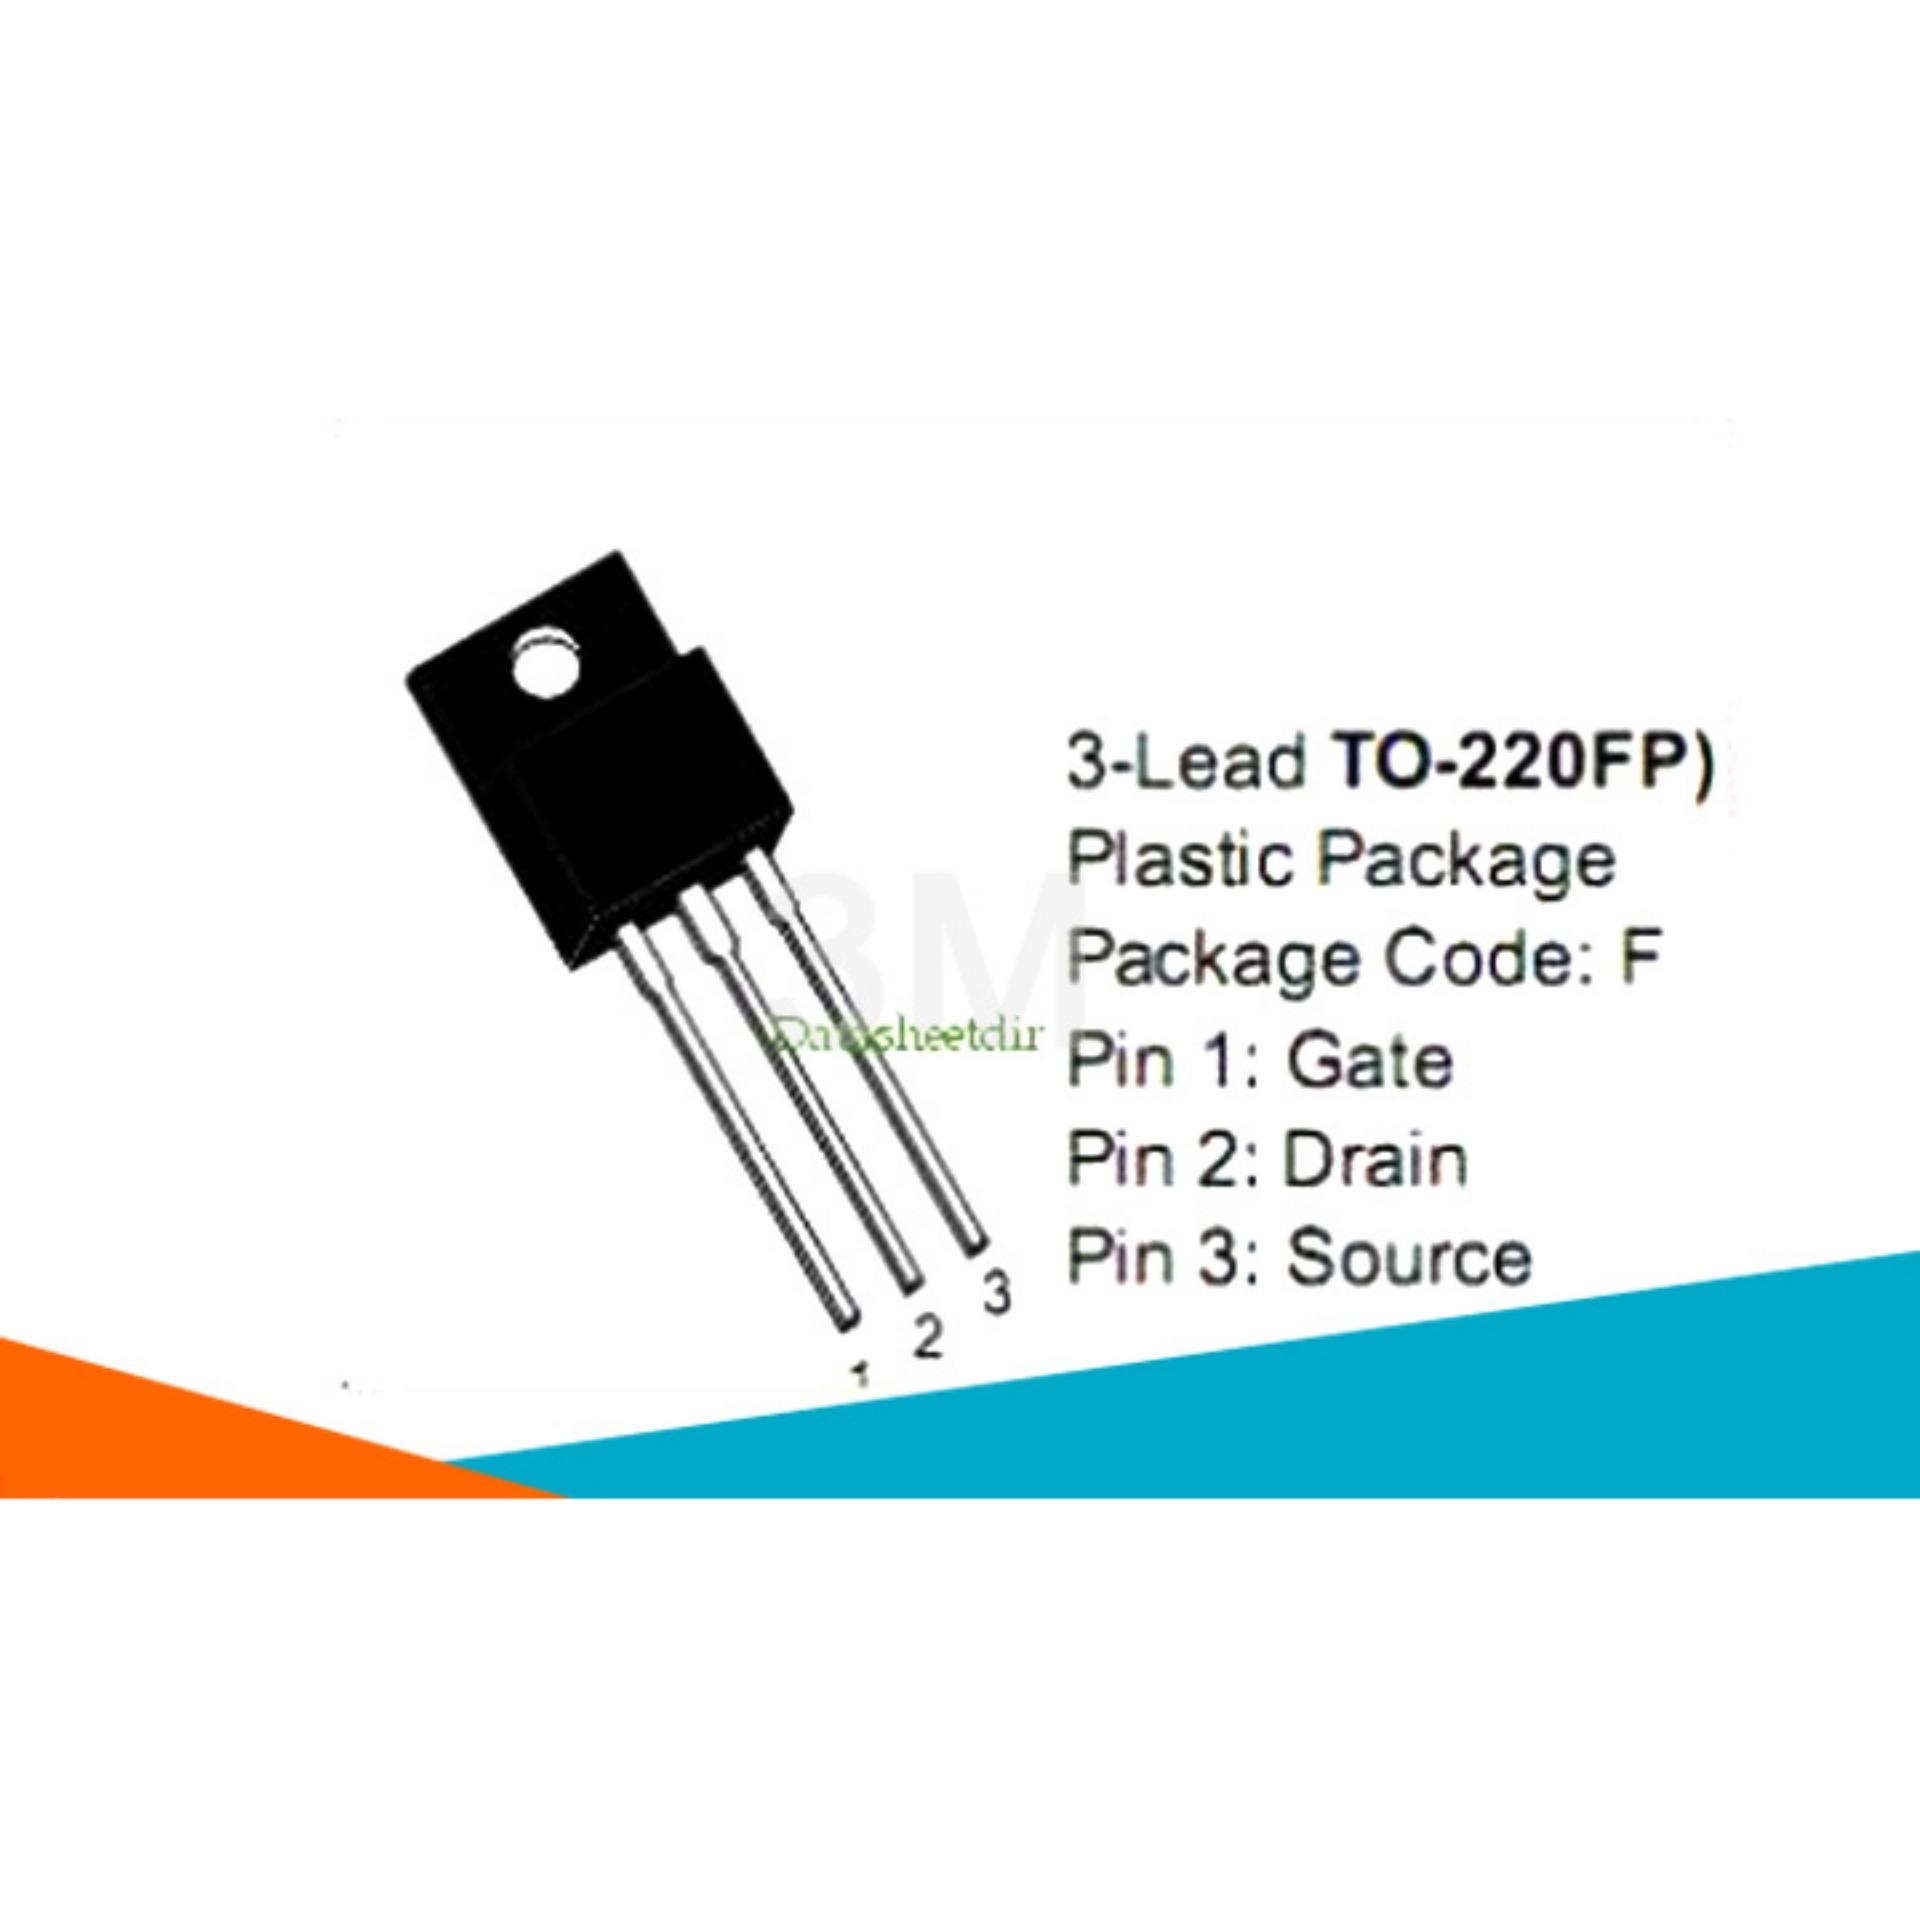 Bộ 2 Con irf3205 mosfet 55V/110A/200W TO-220 N-CH